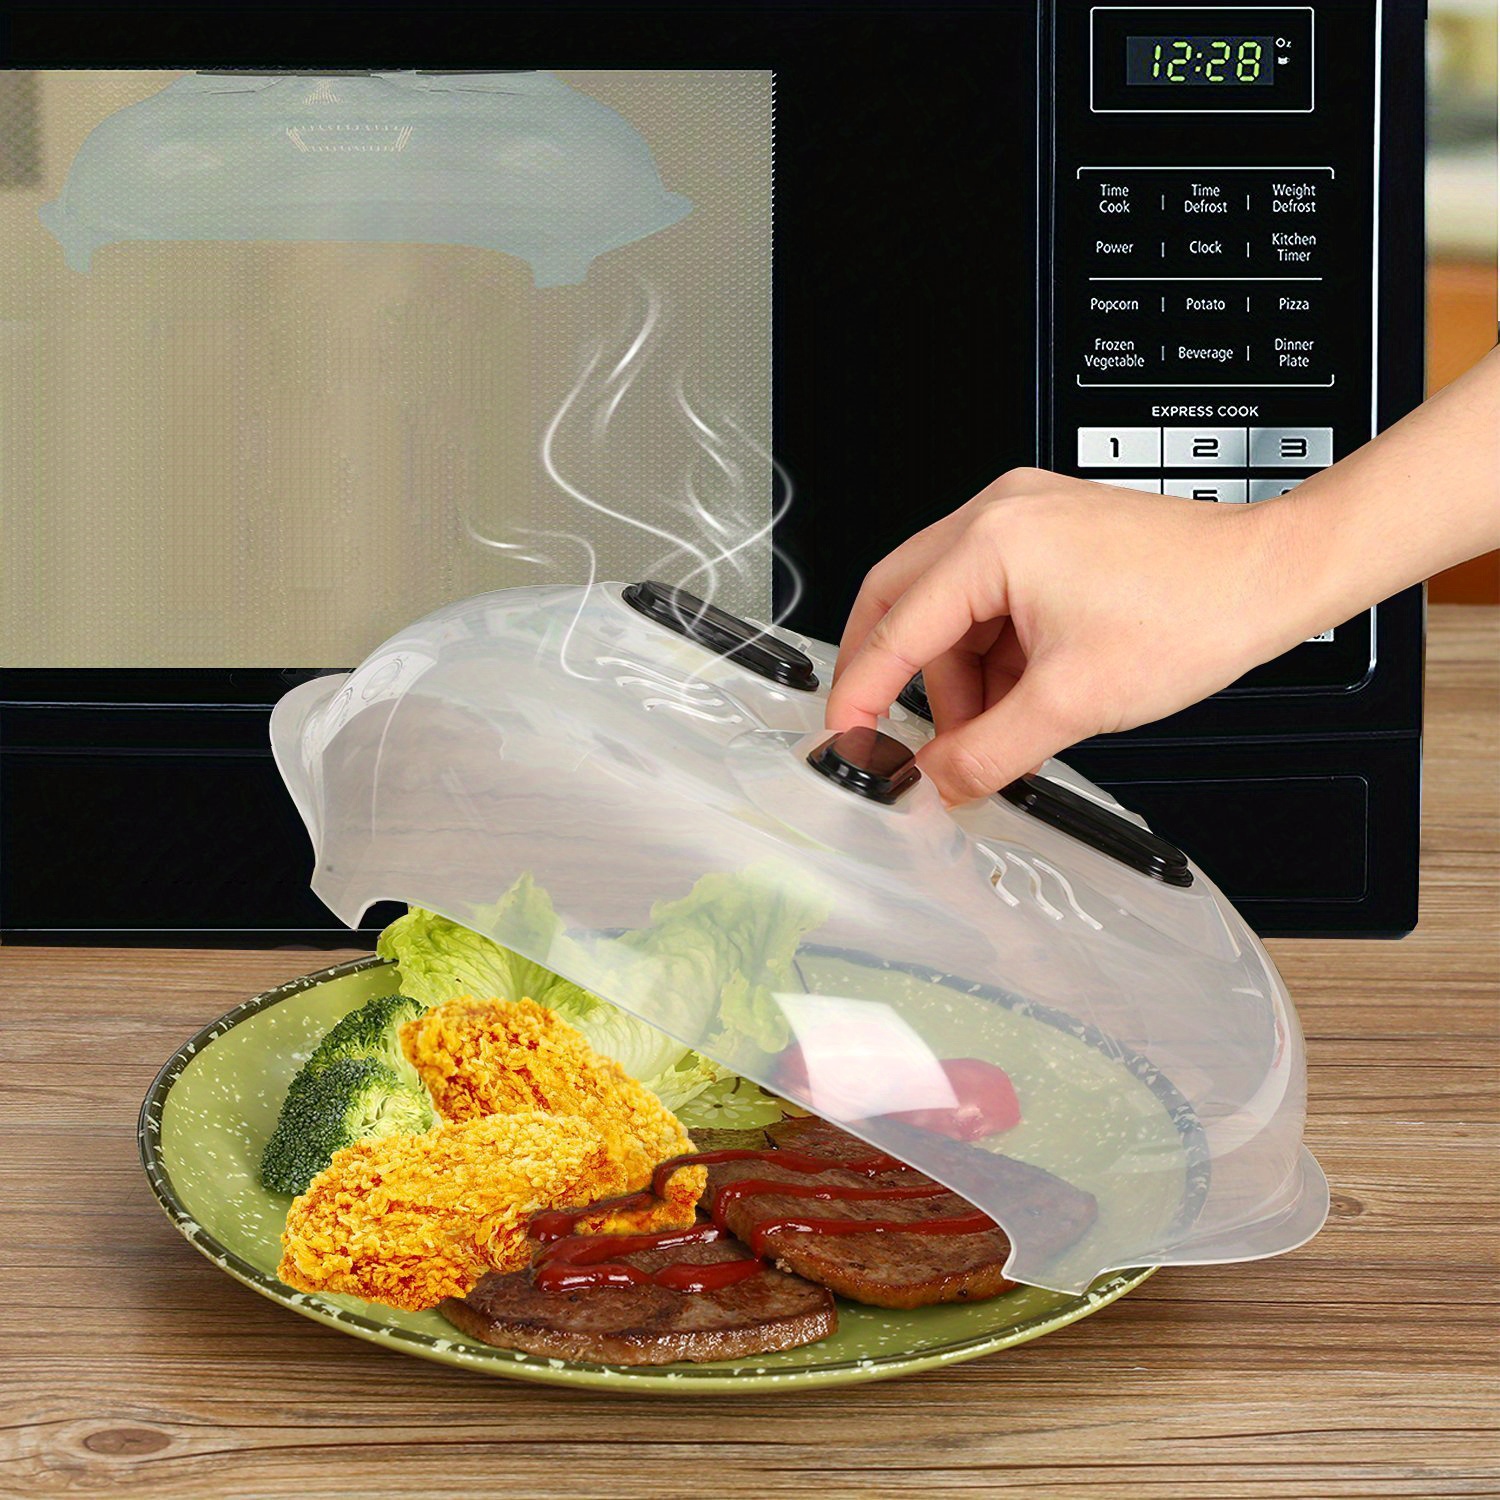 1pc Magnetic Microwave Cover, Anti-Splatter Guard With Steam Vents For  Clean & Organized Cooking, Microwave Cover, Plate Cover, 12*11*3.25in,  Kitchen Gadget For Oven & Food Protection